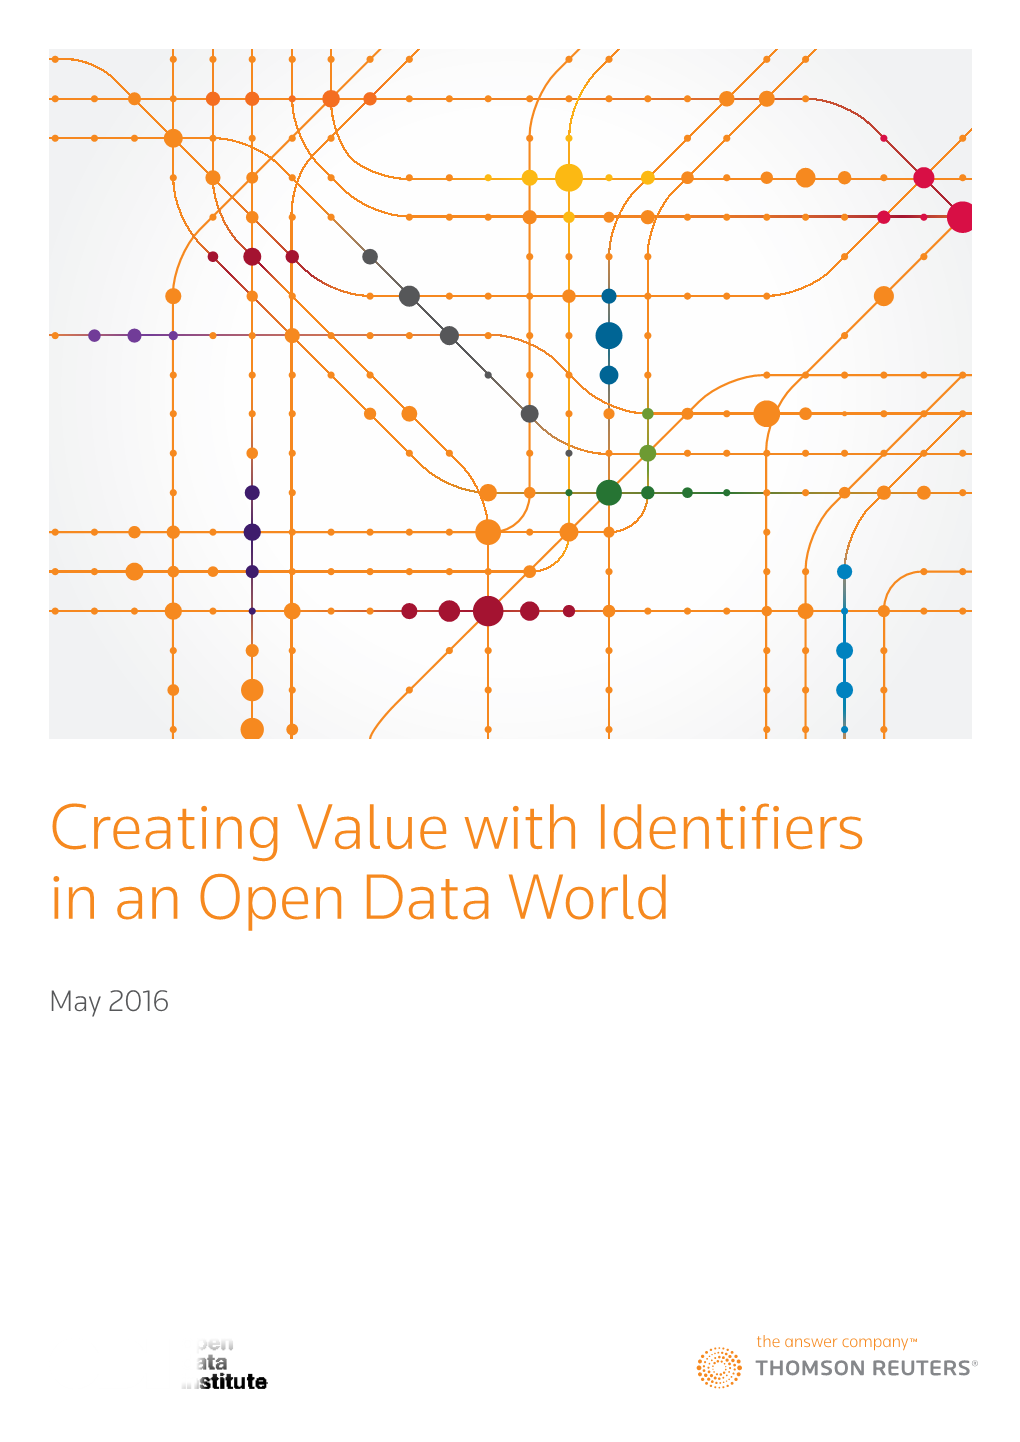 Creating Value with Identifiers in an Open Data World